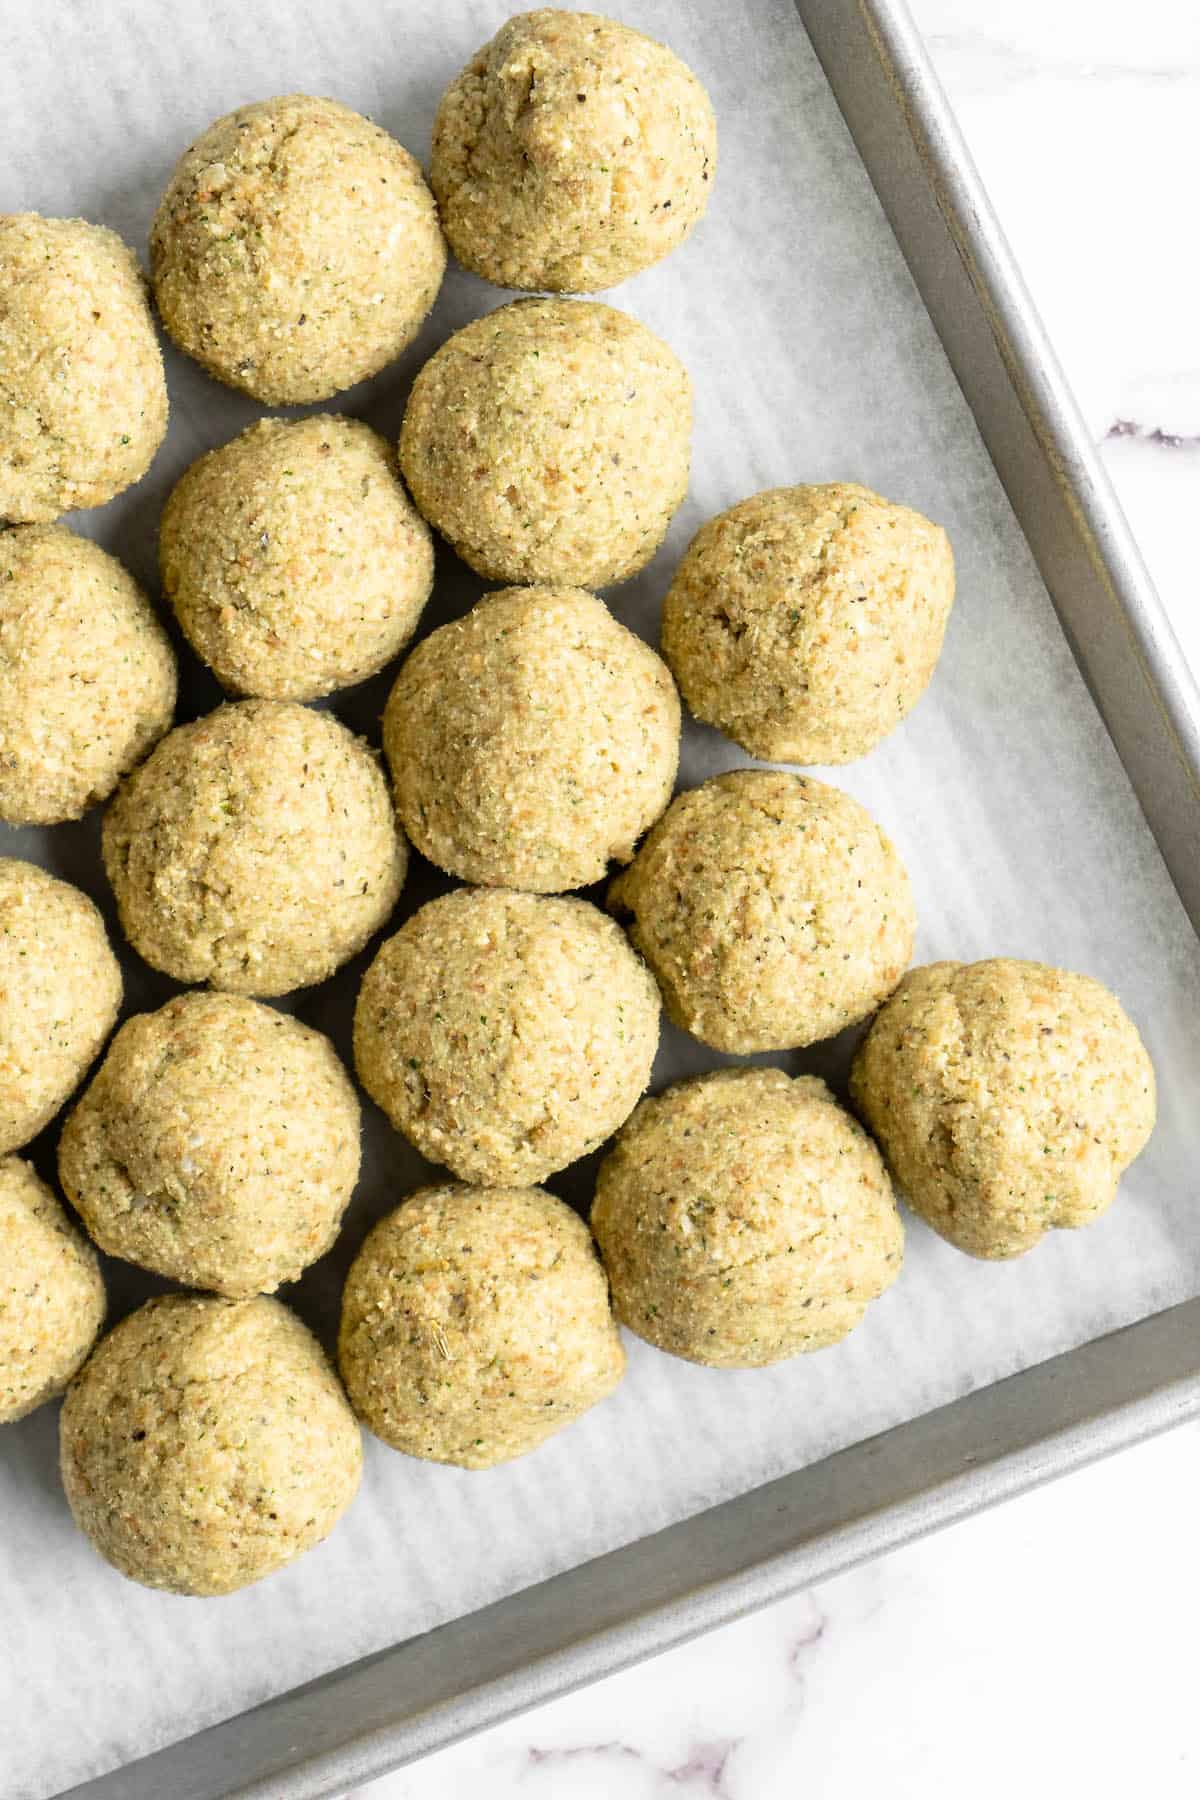 Uncooked vegan meatballs on parchment lined sheet pan